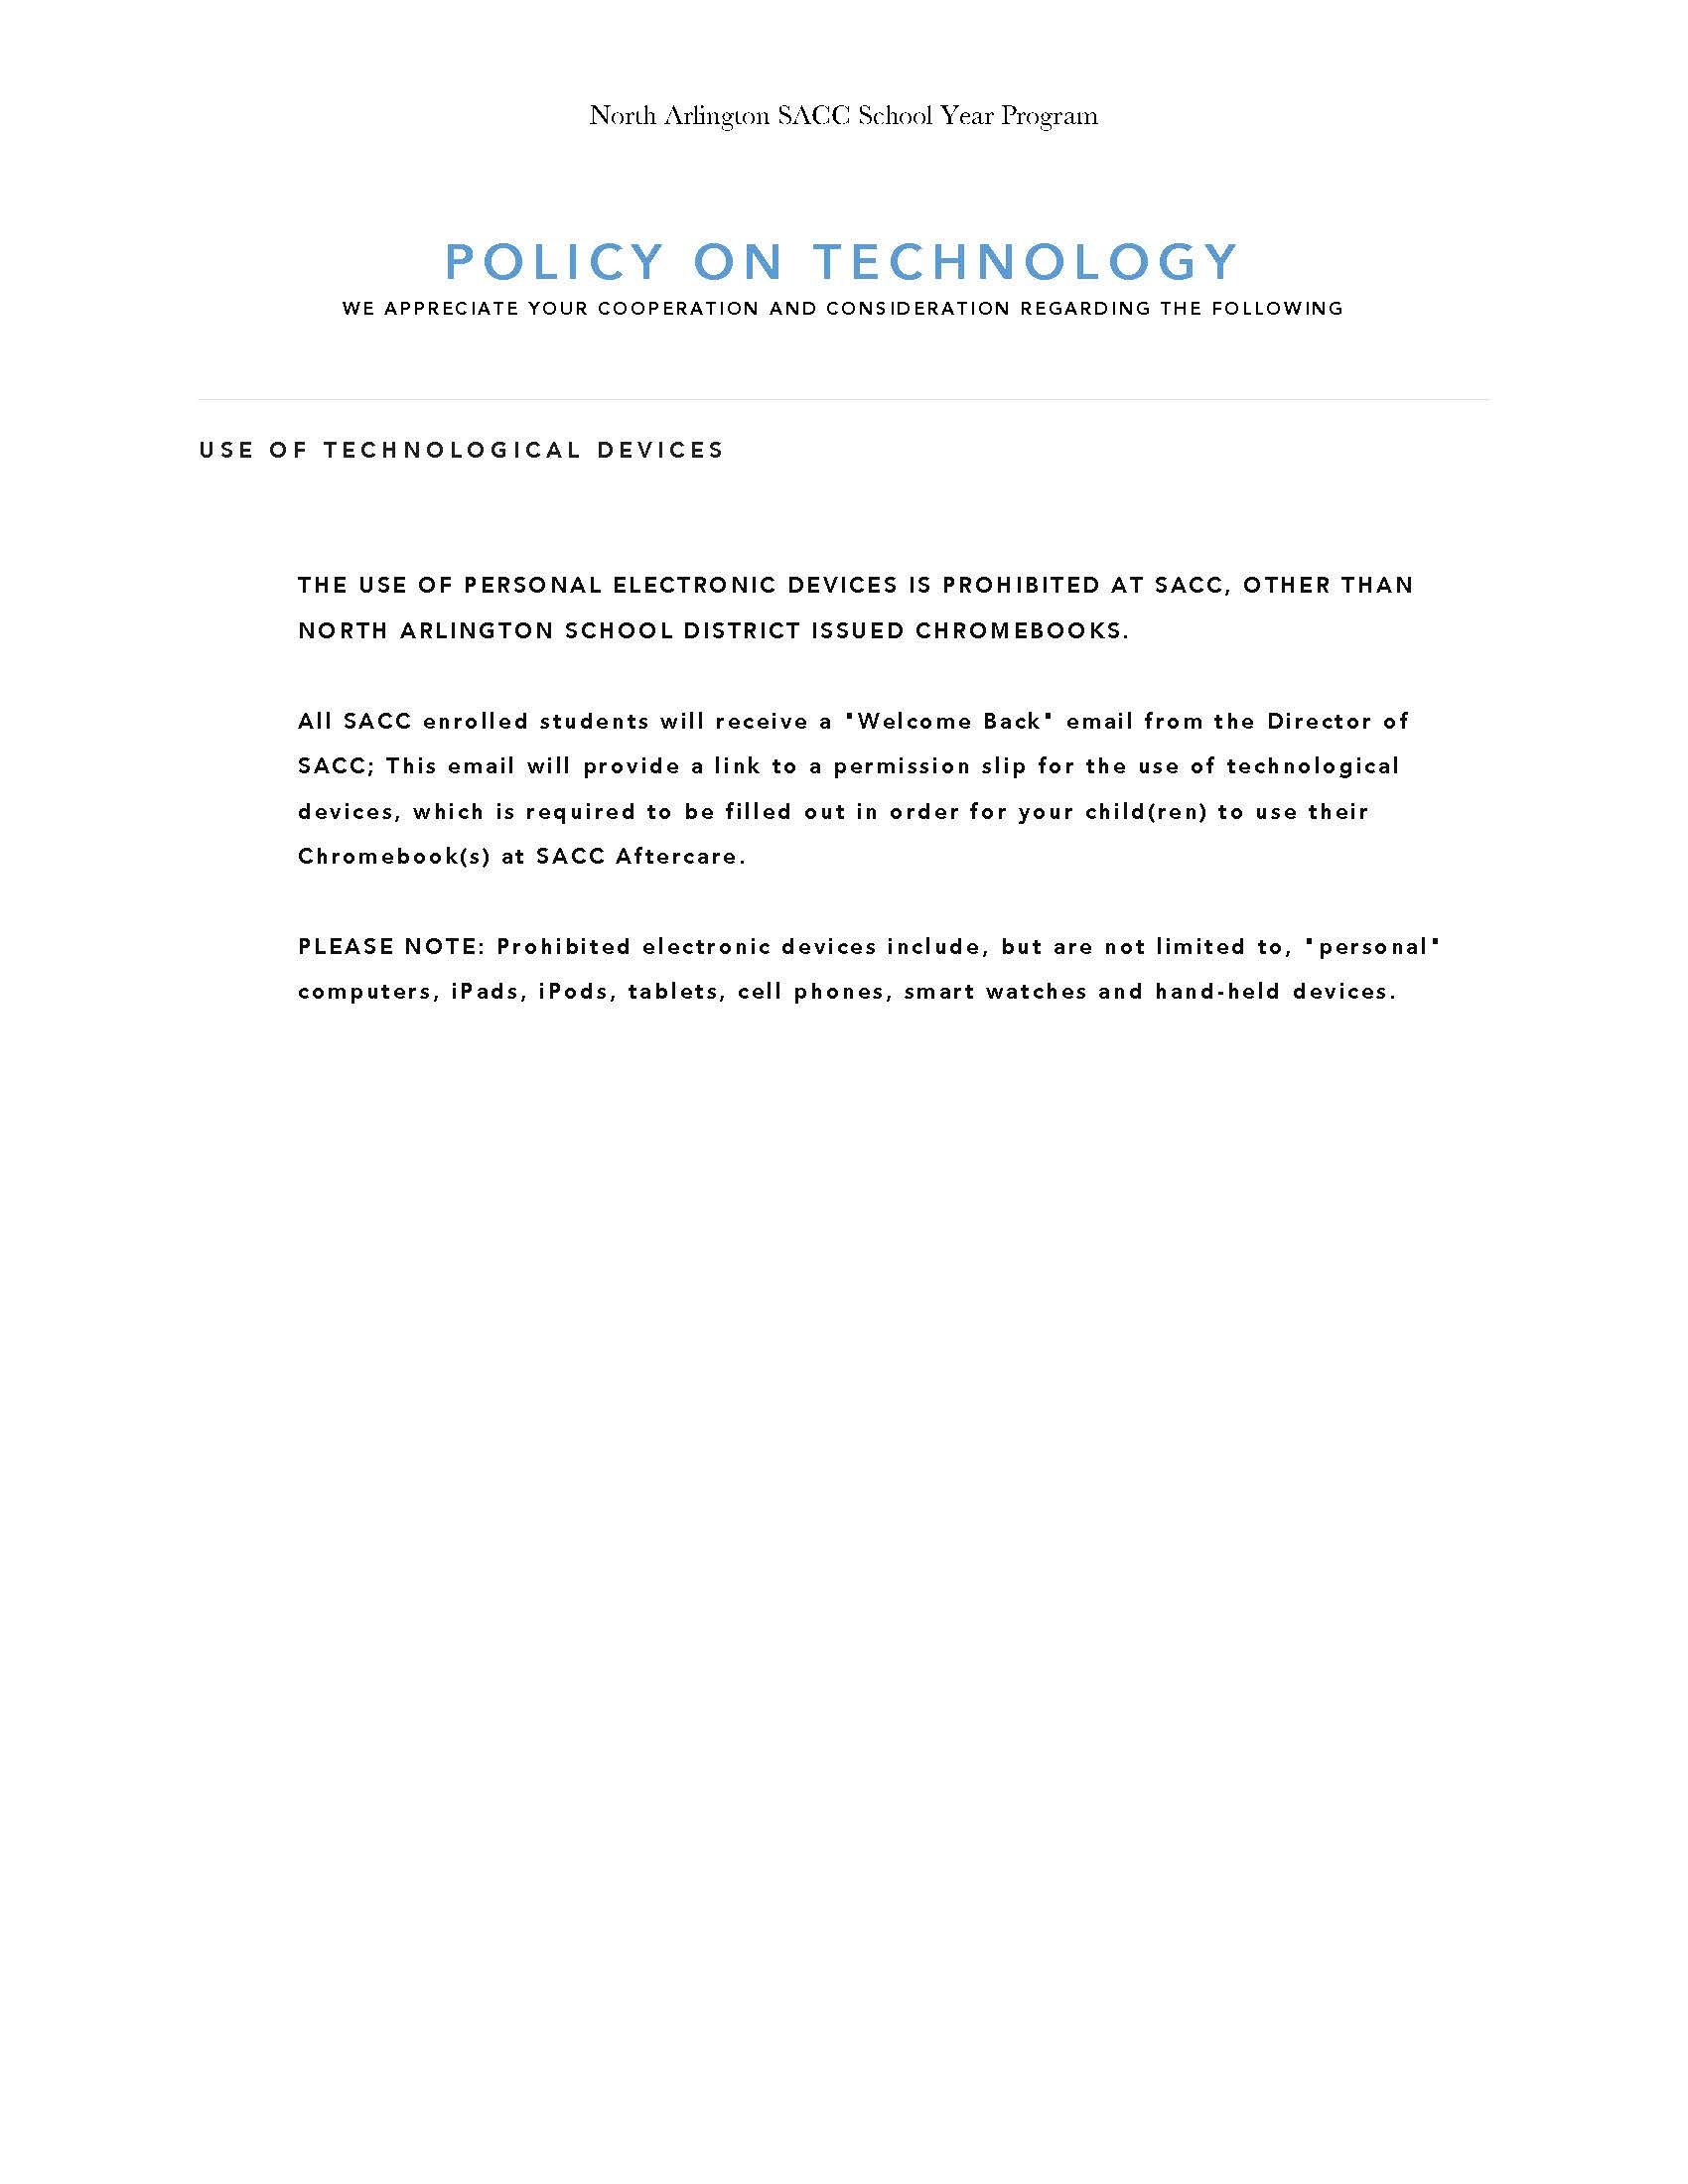 Policy on Technology